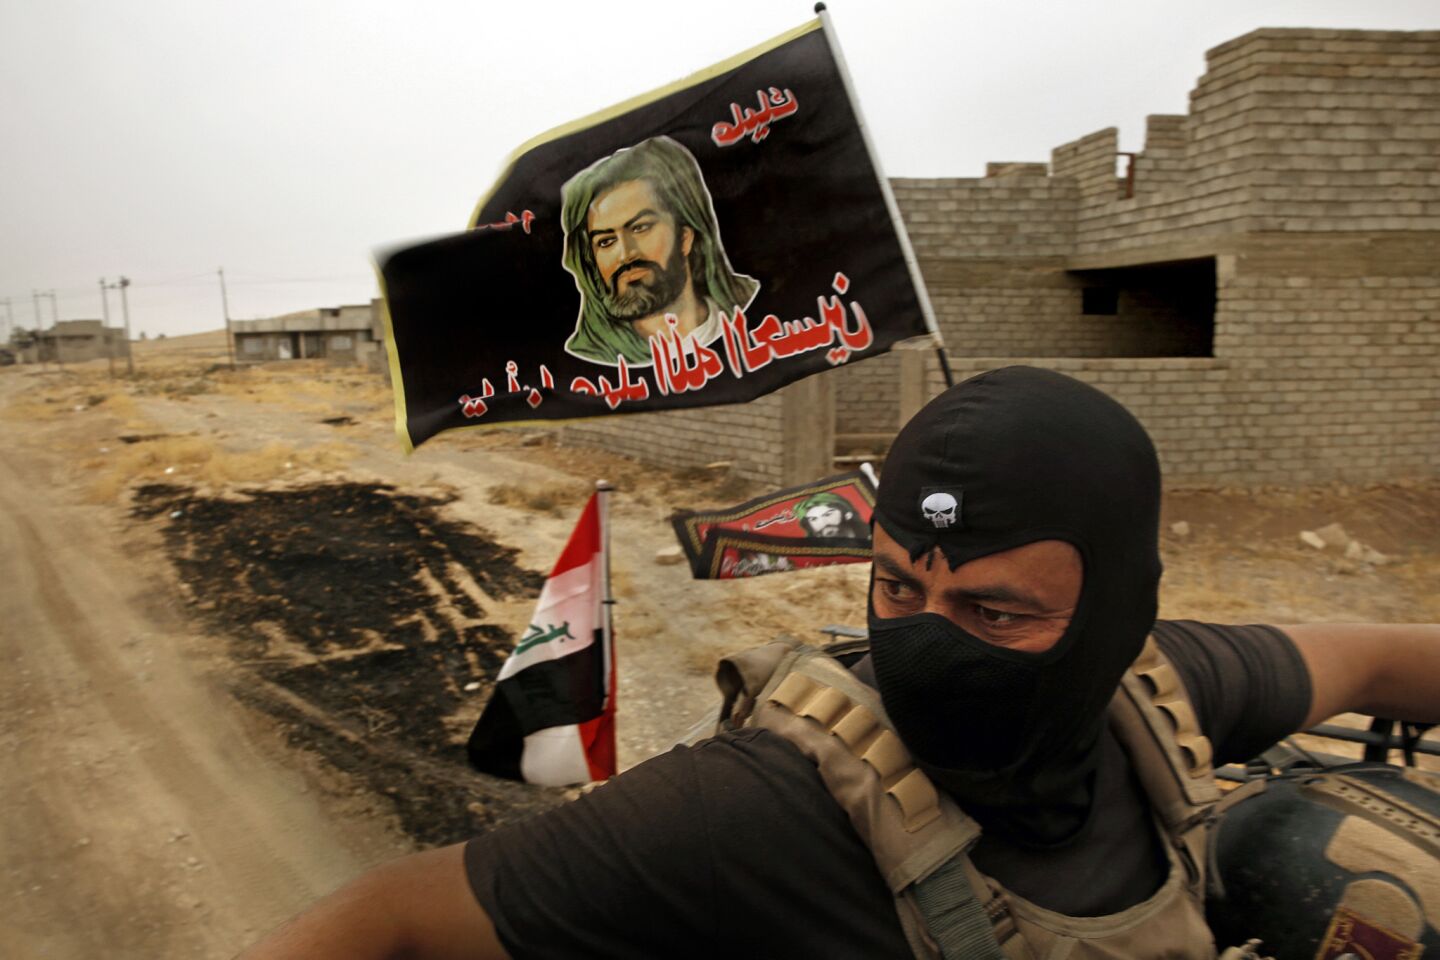 An Iraqi special forces member rides in the turret of a humvee with a Shiite religious banner flying behind him as he patrols Bartella, Iraq.